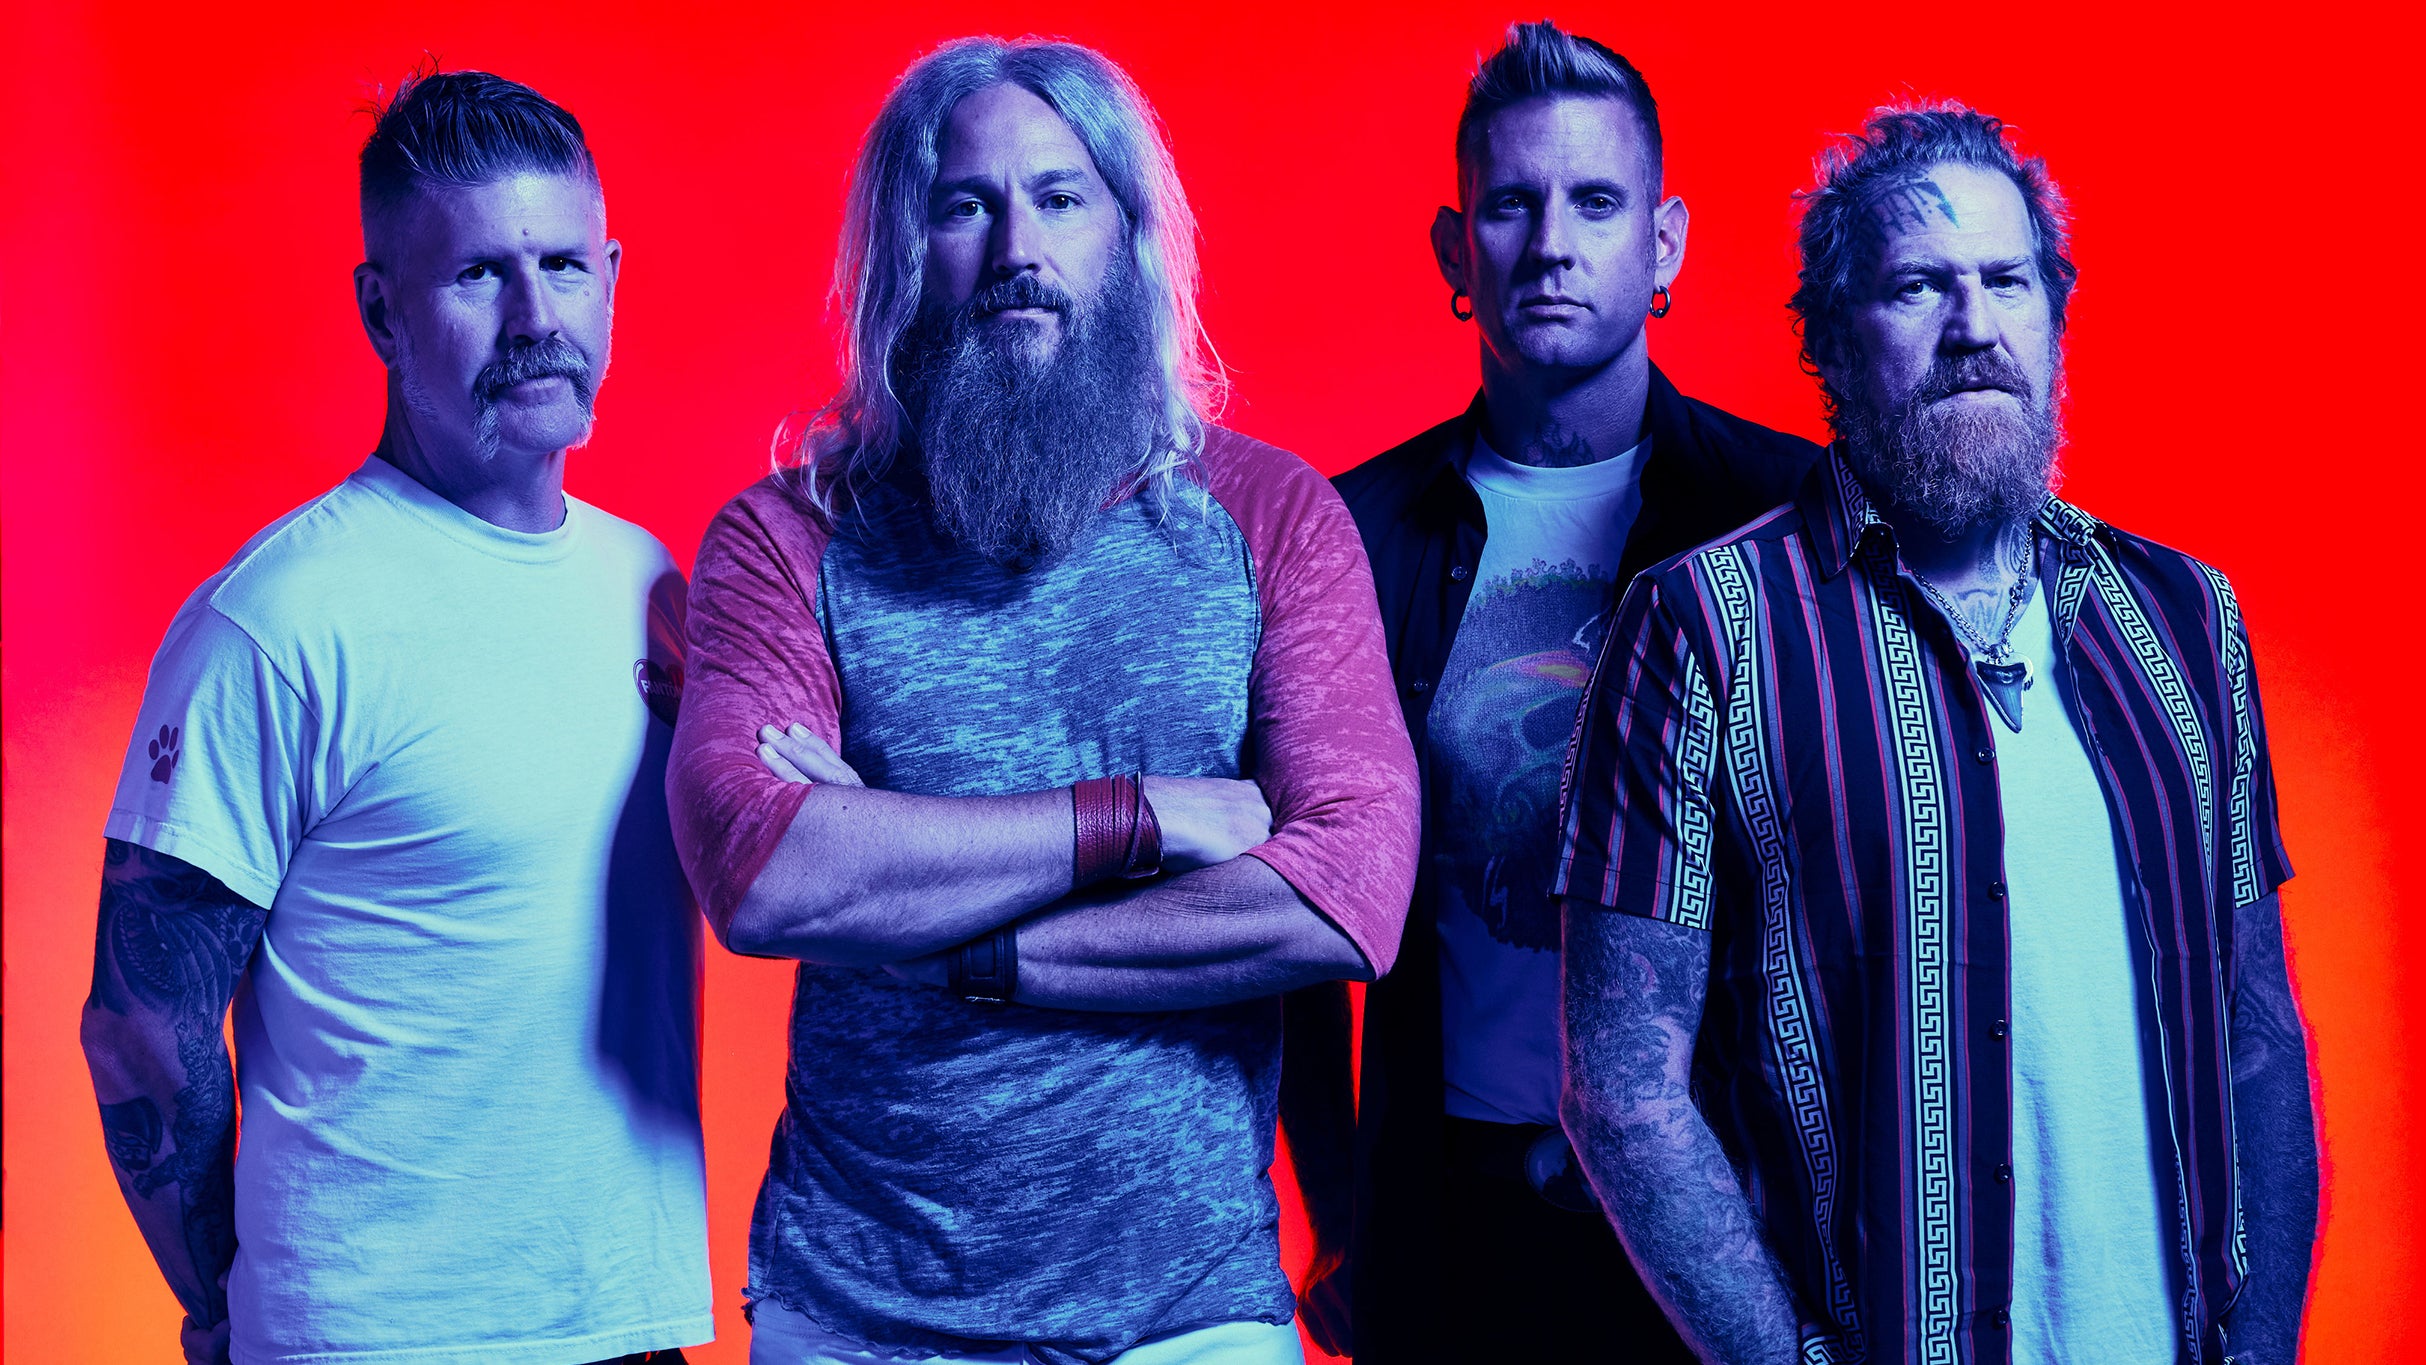 The Mega-Monsters Tour: Mastodon & Gojira w/ special guest Lorna Shore free presale listing for event tickets in Boston, MA (MGM Music Hall at Fenway)